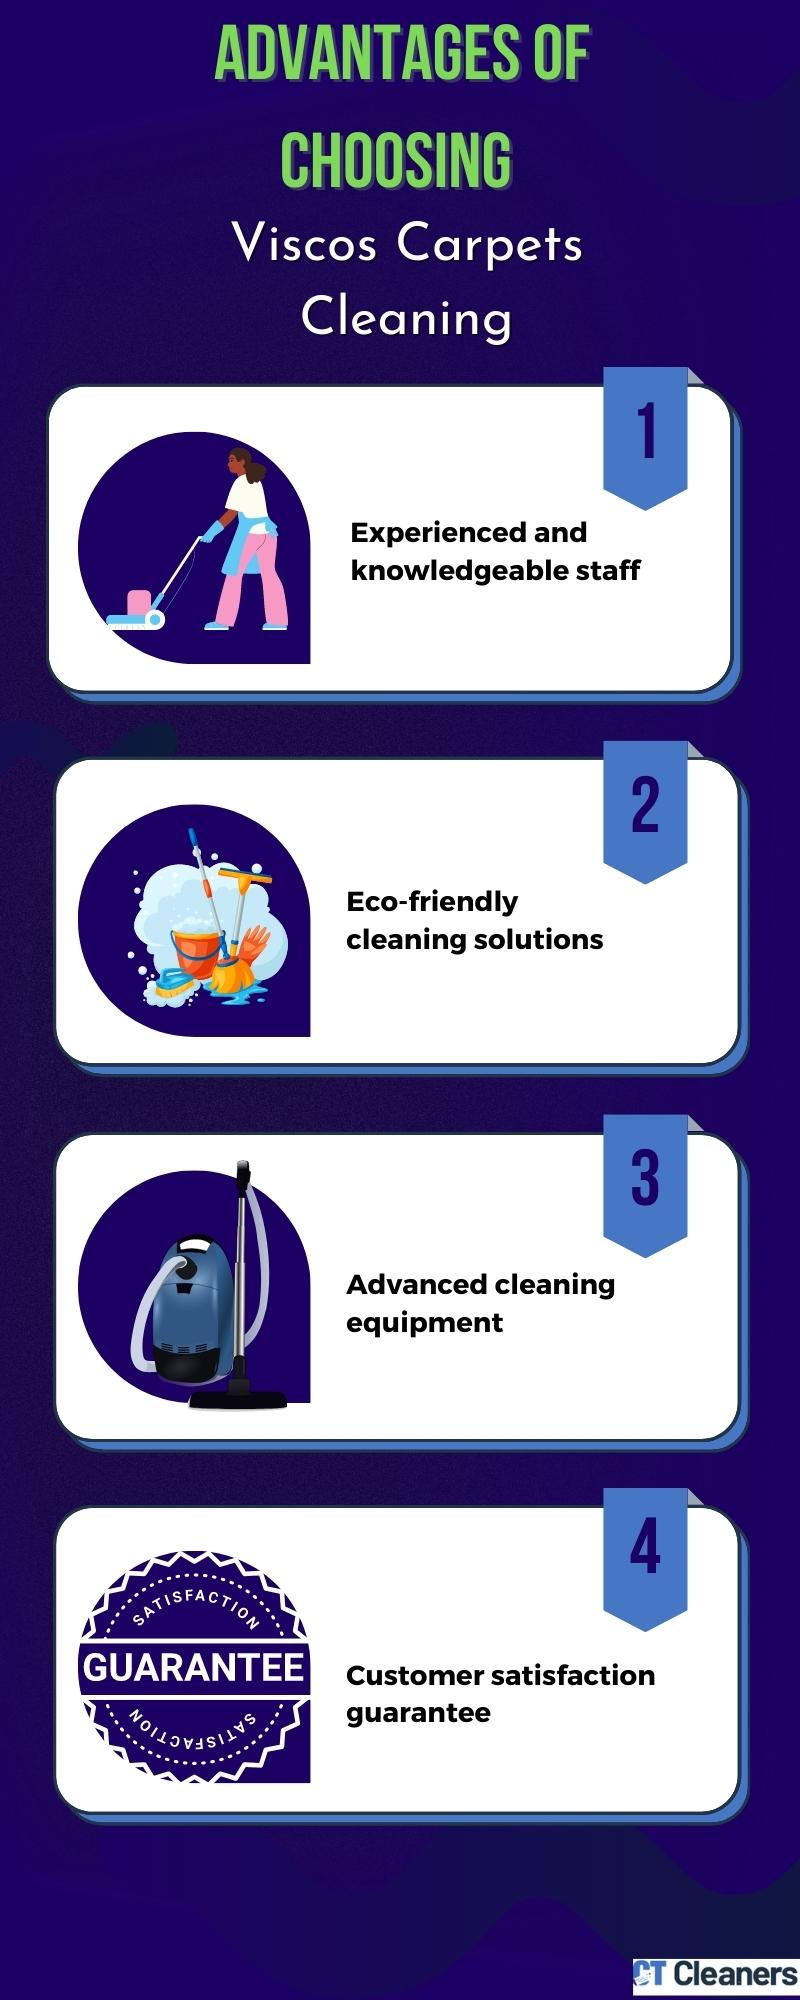 Advantages of Choosing Viscos Carpets Cleaning